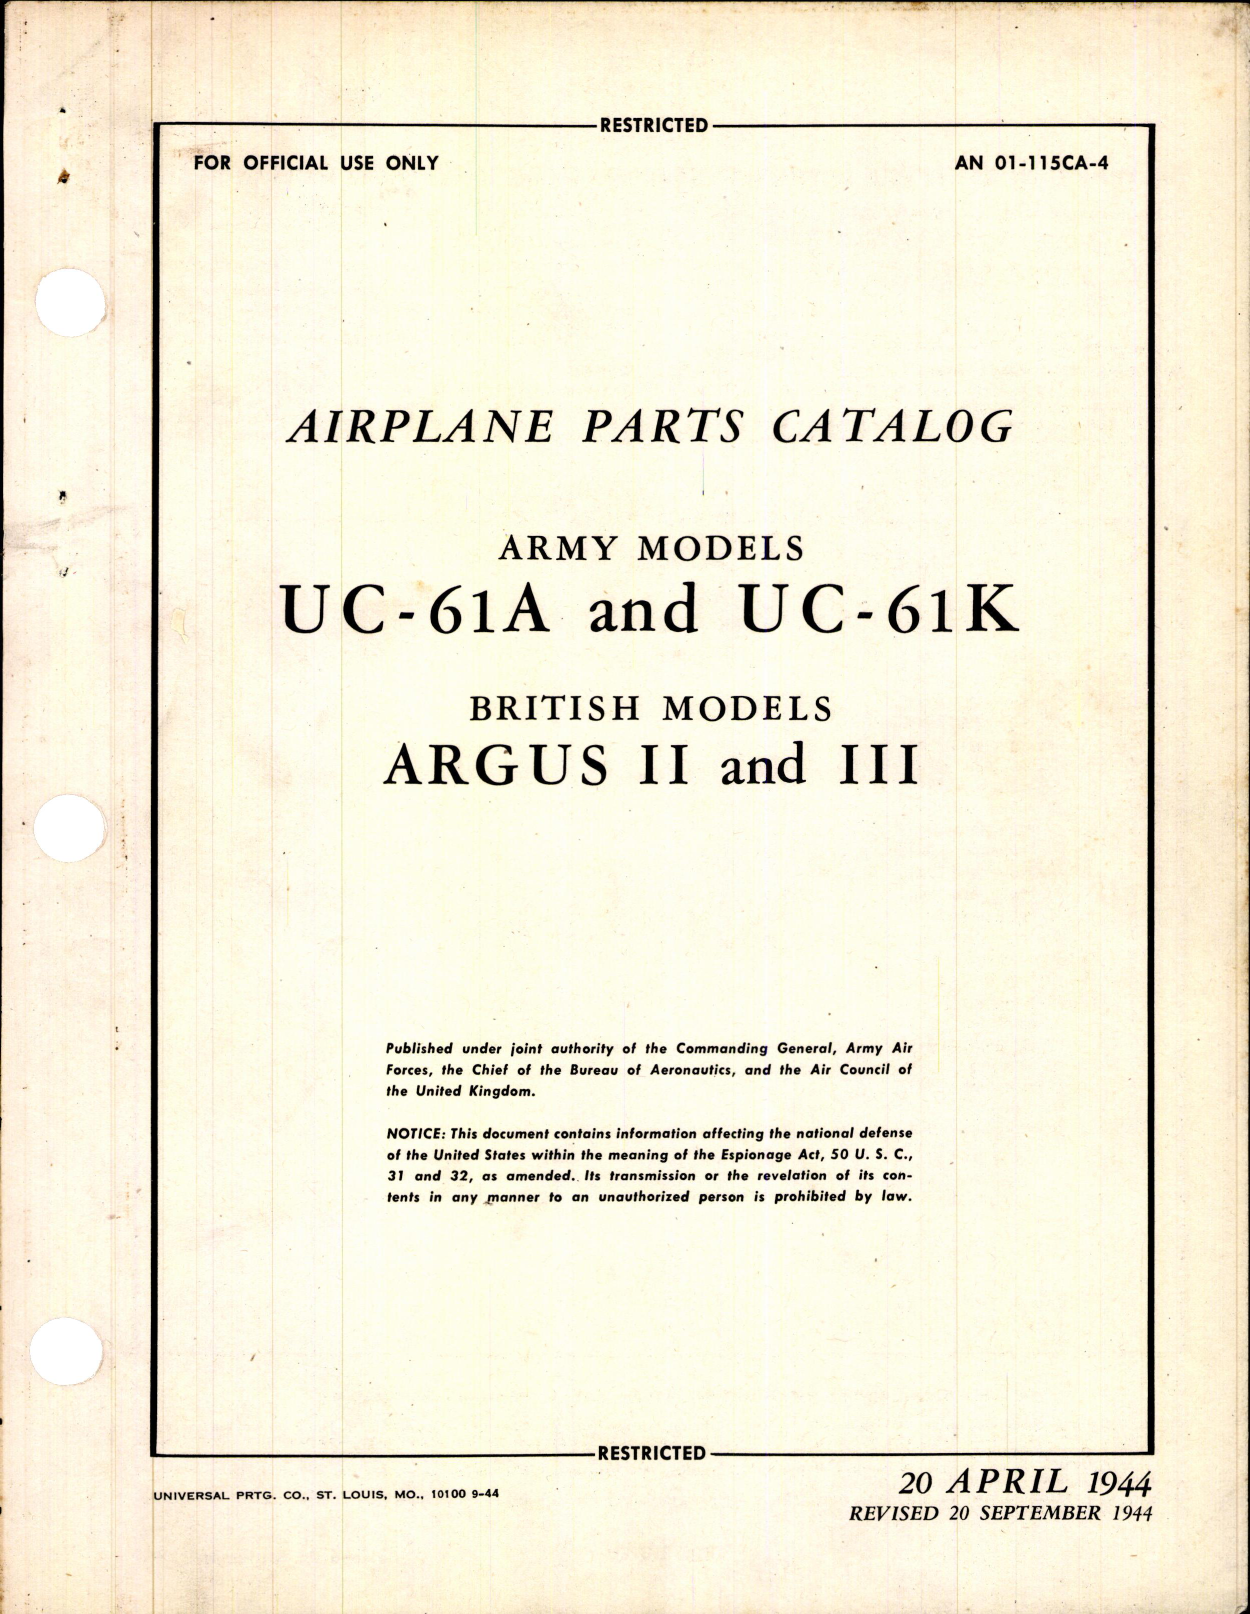 Sample page 1 from AirCorps Library document: Airplane Parts catalog for UC-61A, and UC-61K